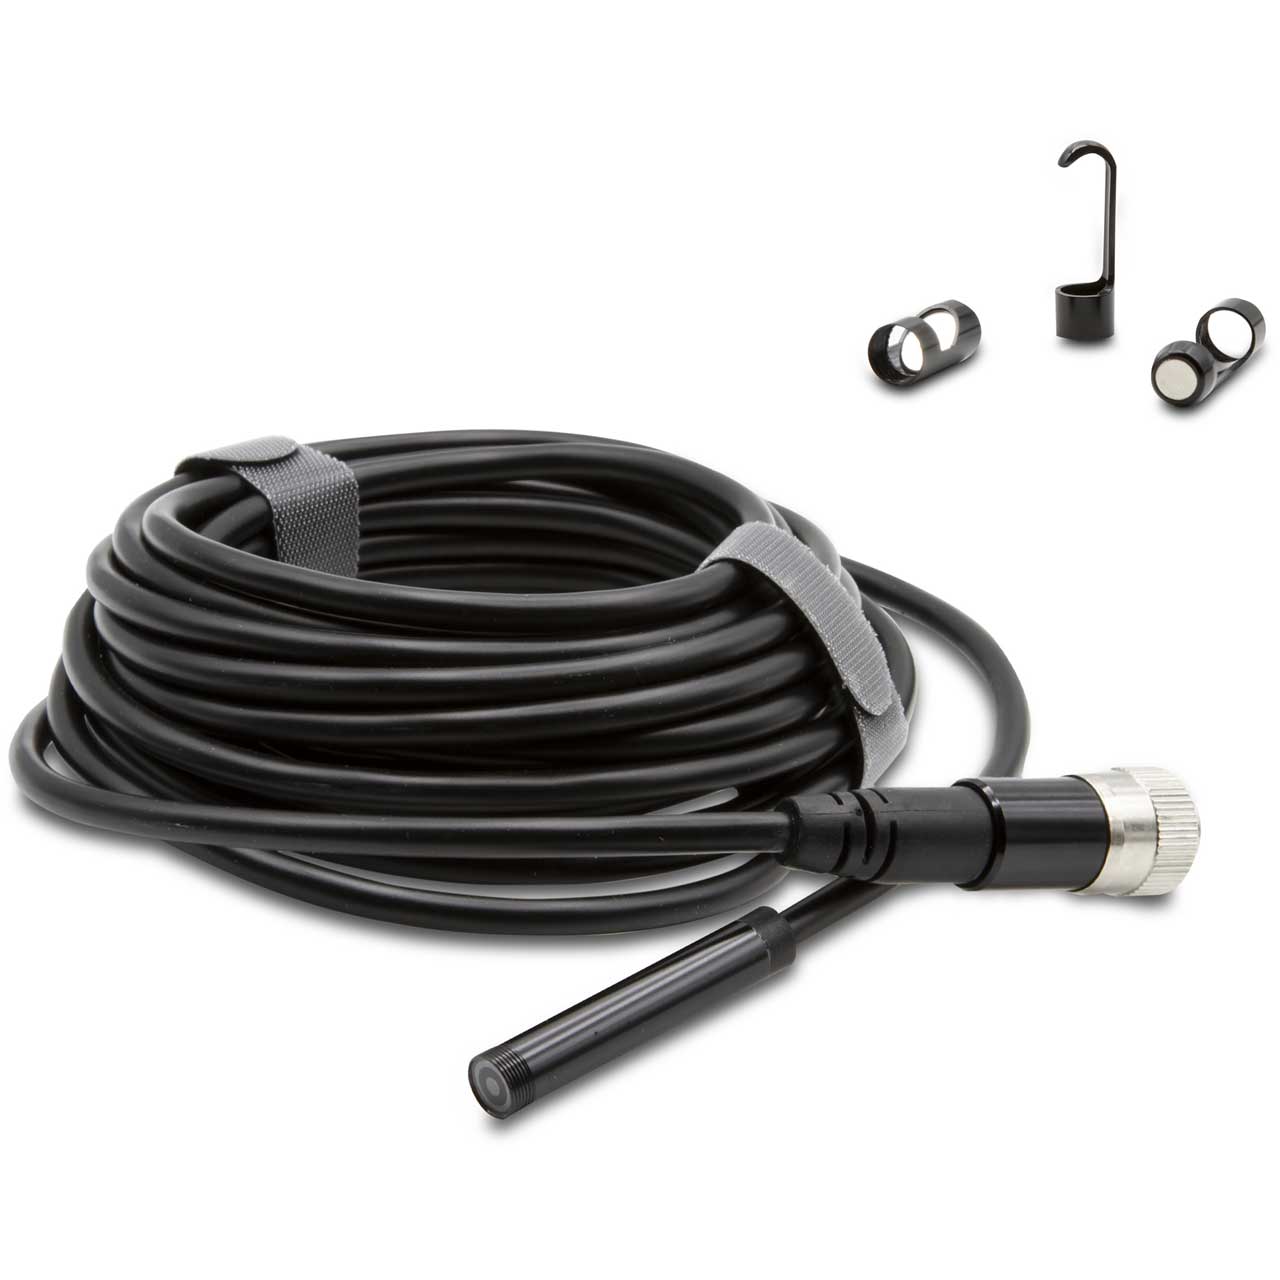 Triplett BR300CAM-5M Replacement Borescope Camera Probe on 5M Cable for BR300